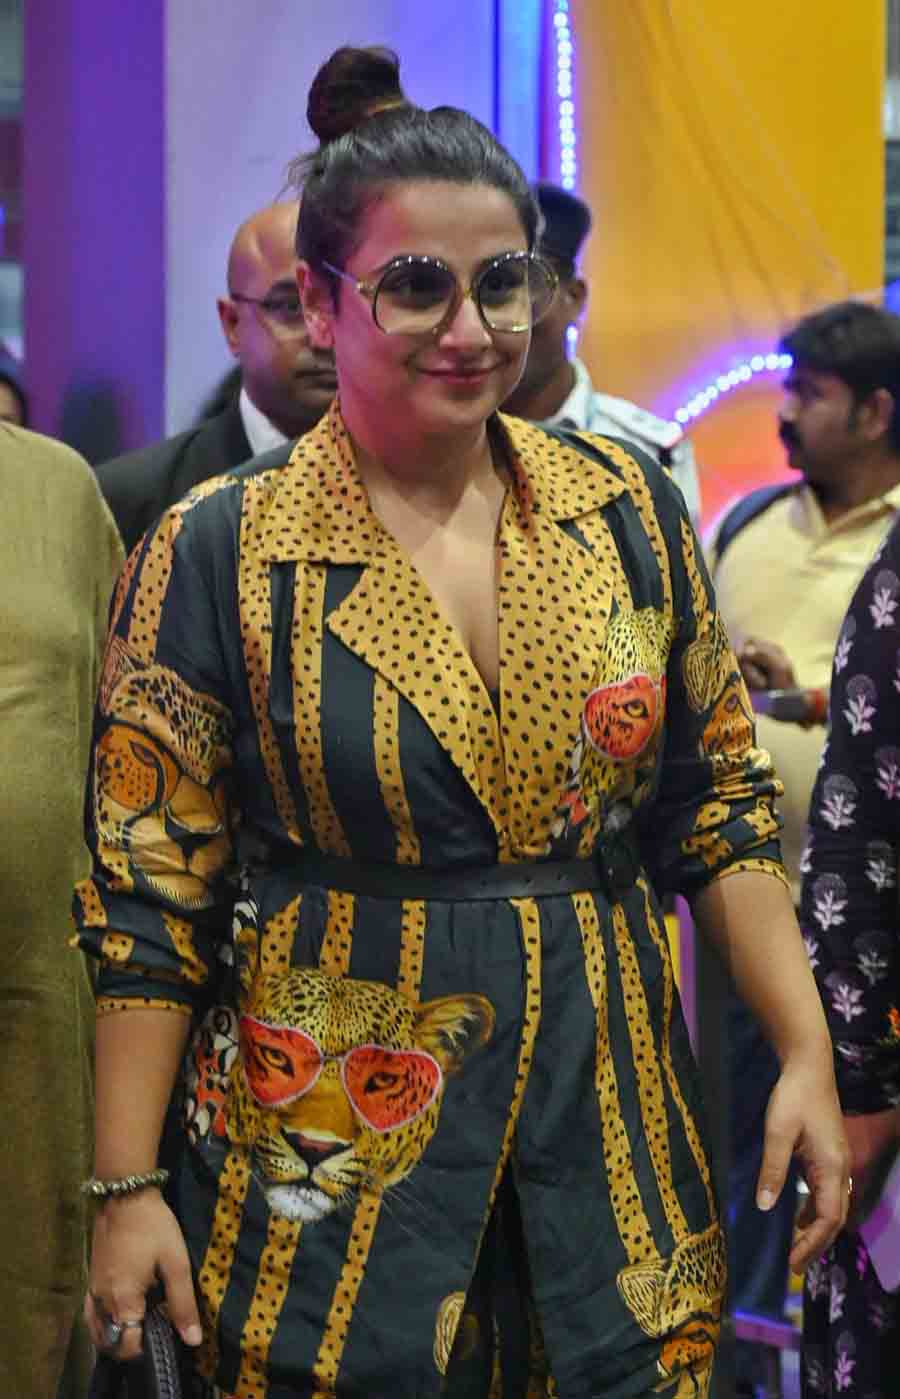 Actress Vidya Balan arrives in Kolkata on Friday evening ahead of Durga Puja celebrations in the city. The 'Neeyat' actress, who had shot extensively in Kolkata for her film 'Kahaani', is scheduled to visit some puja pandals